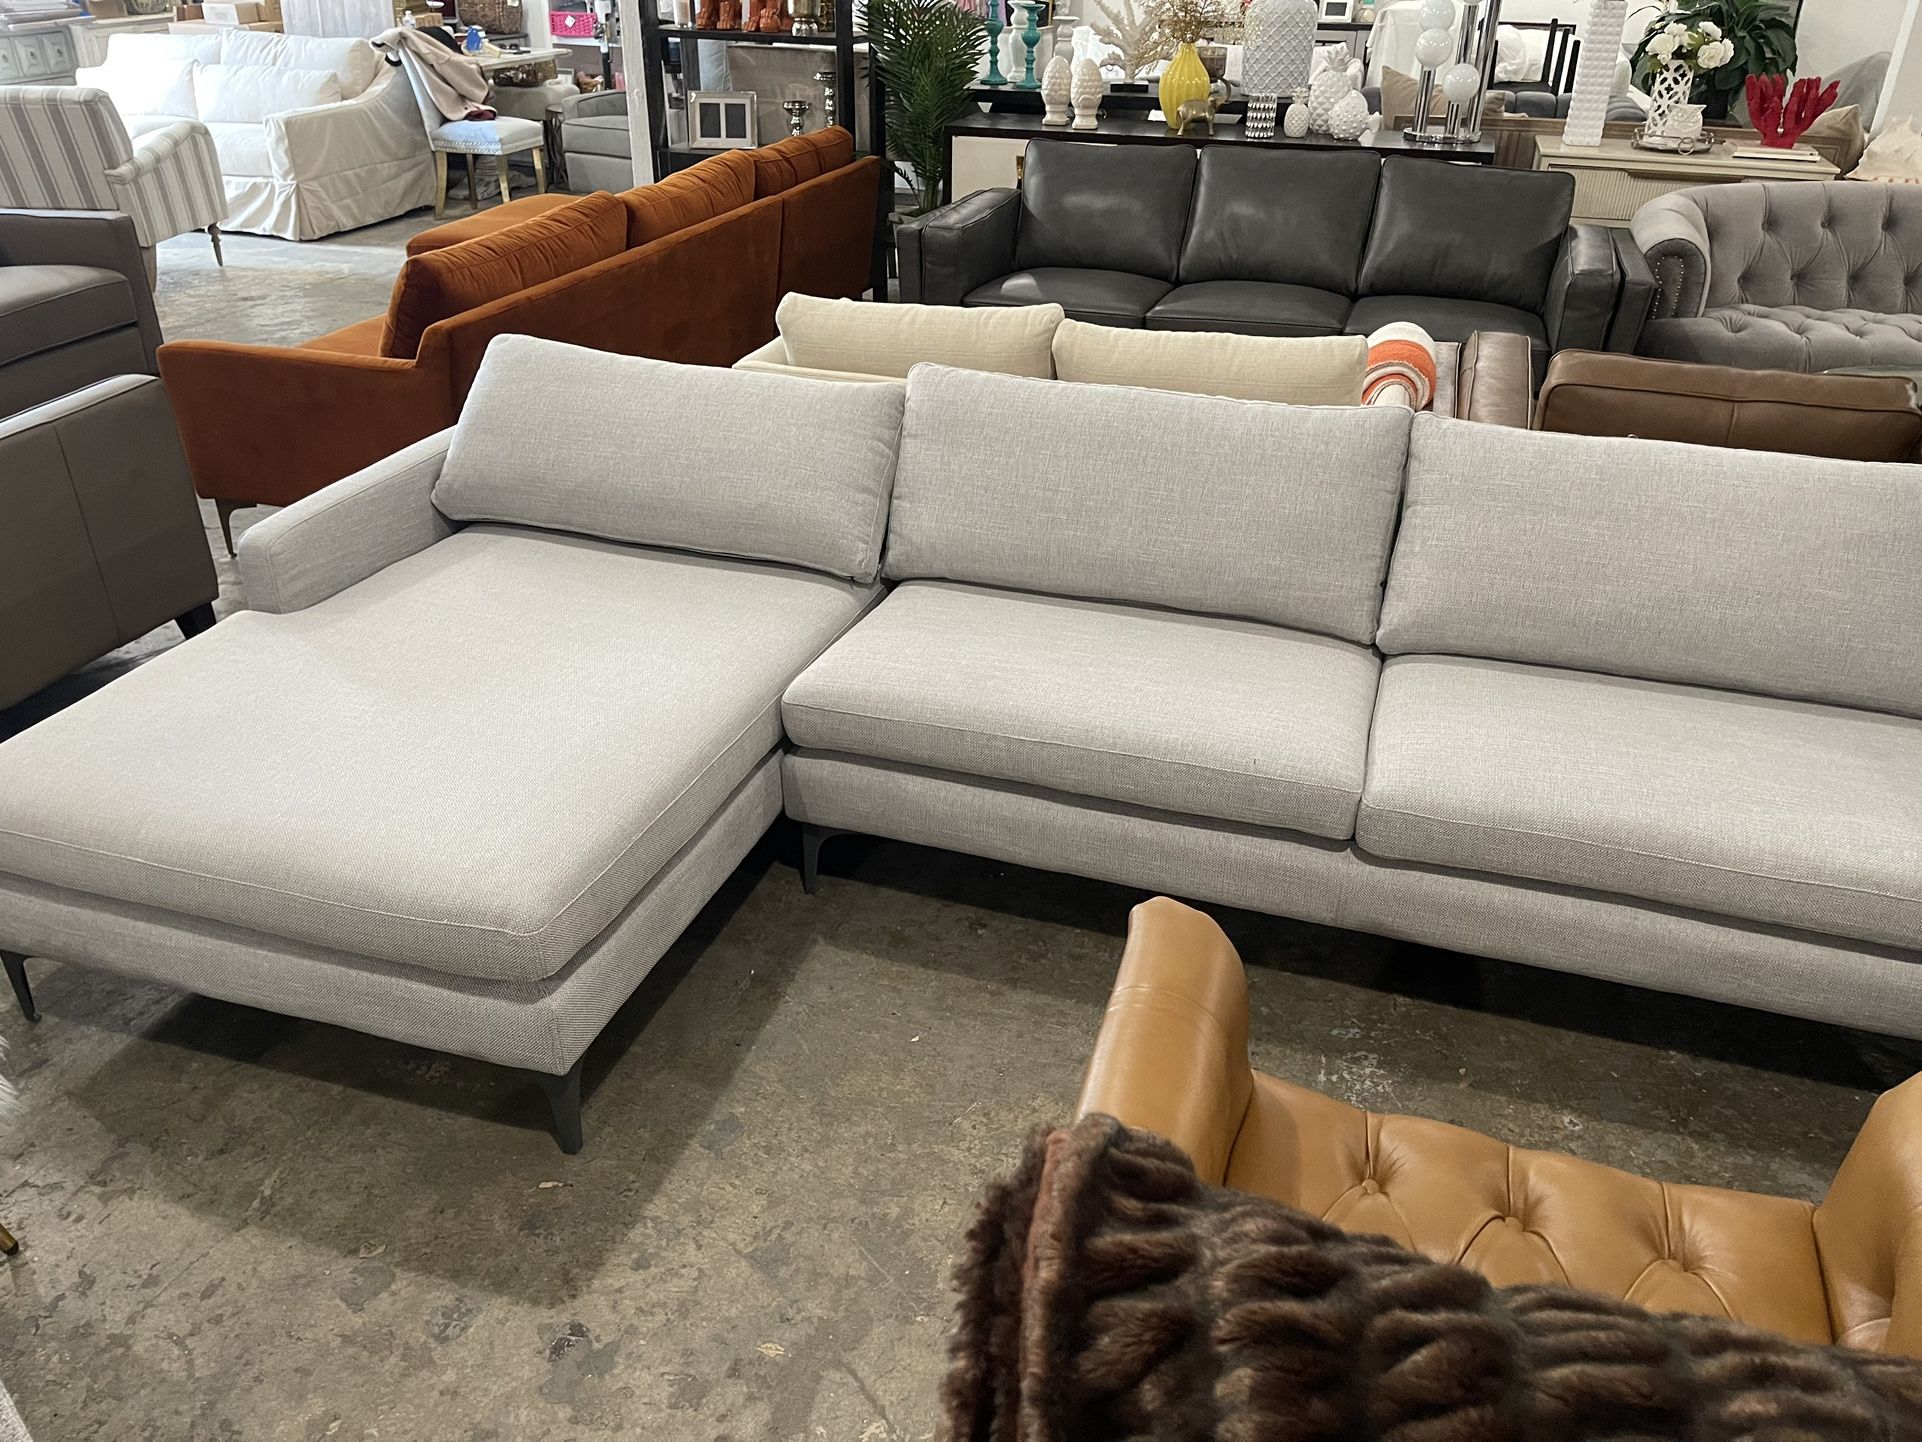 New Sectional Sofa Delivery Available 